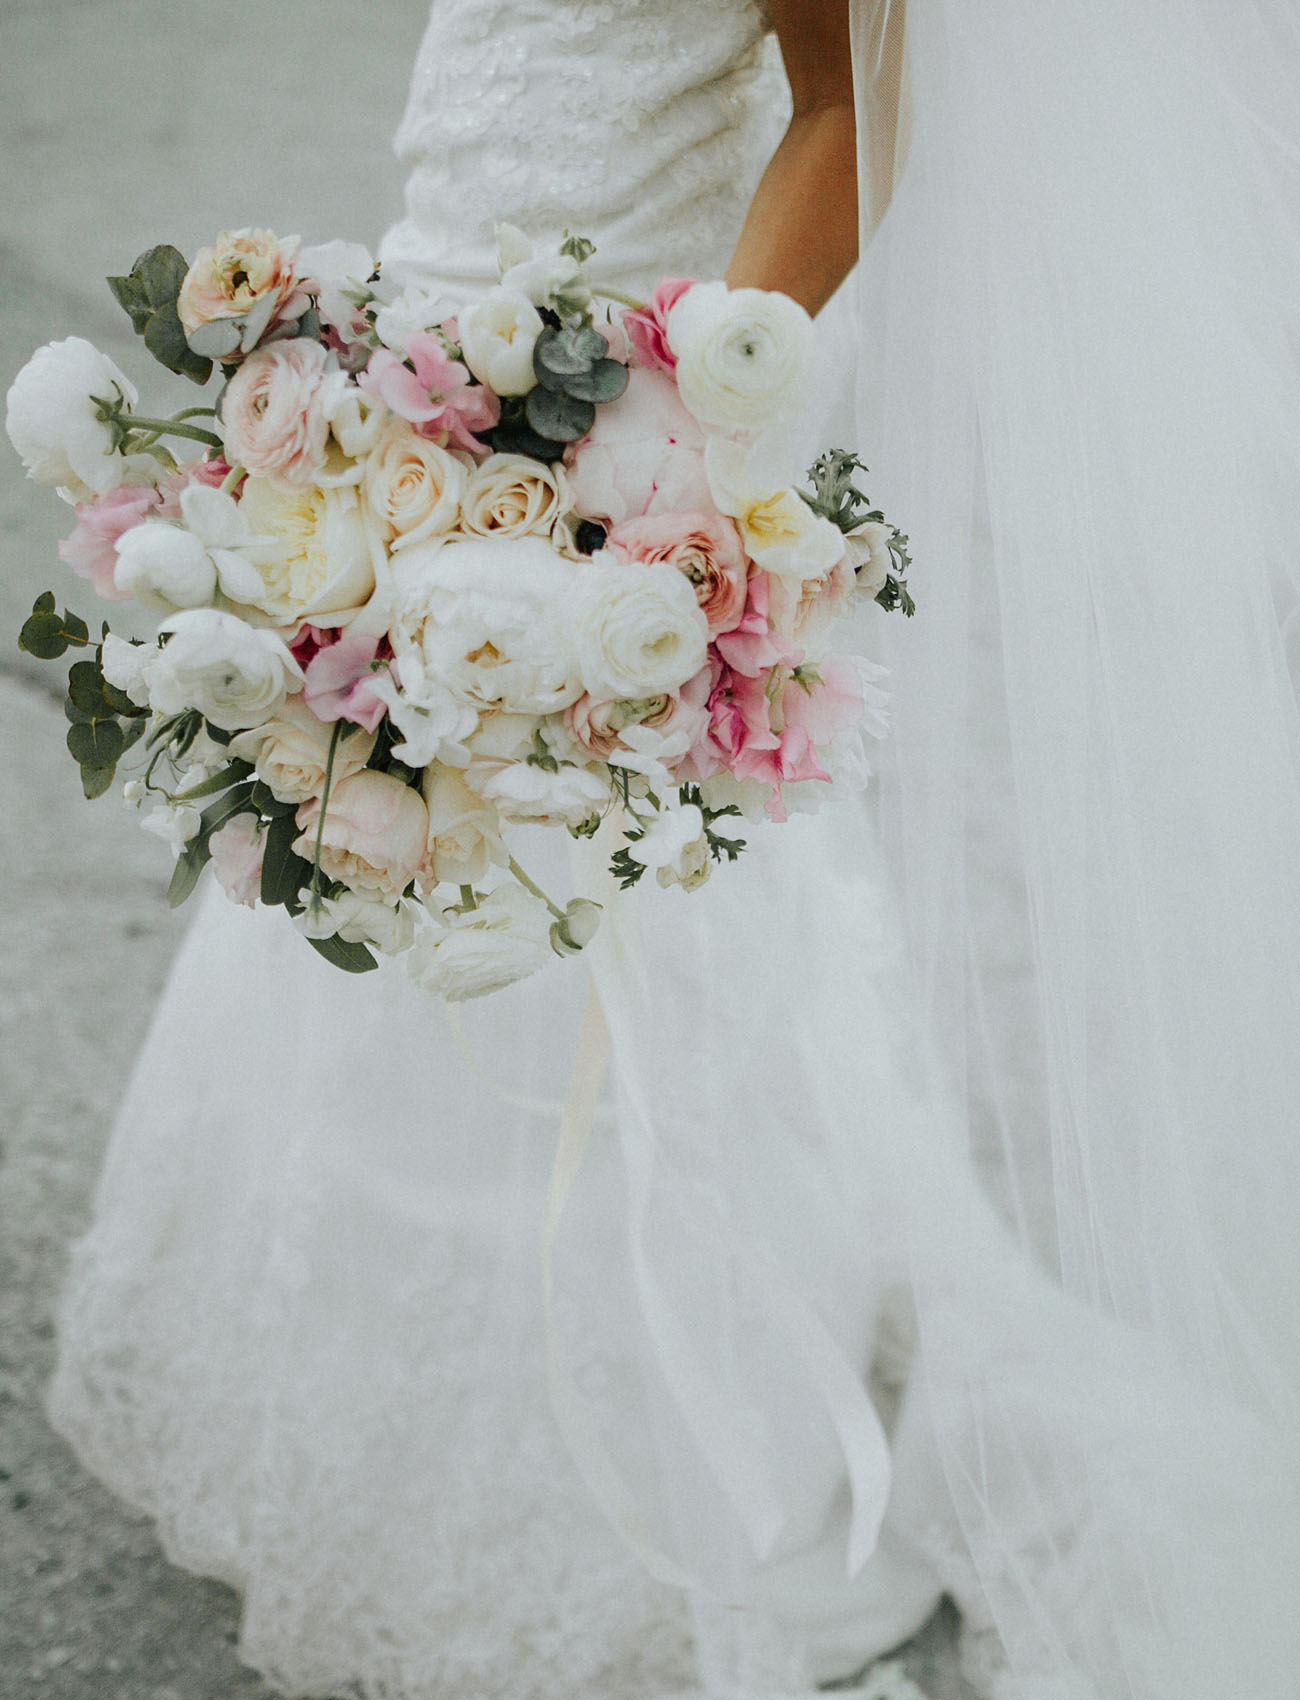 Lush, pastel bridal bouquet filled with peonies and ranunculus